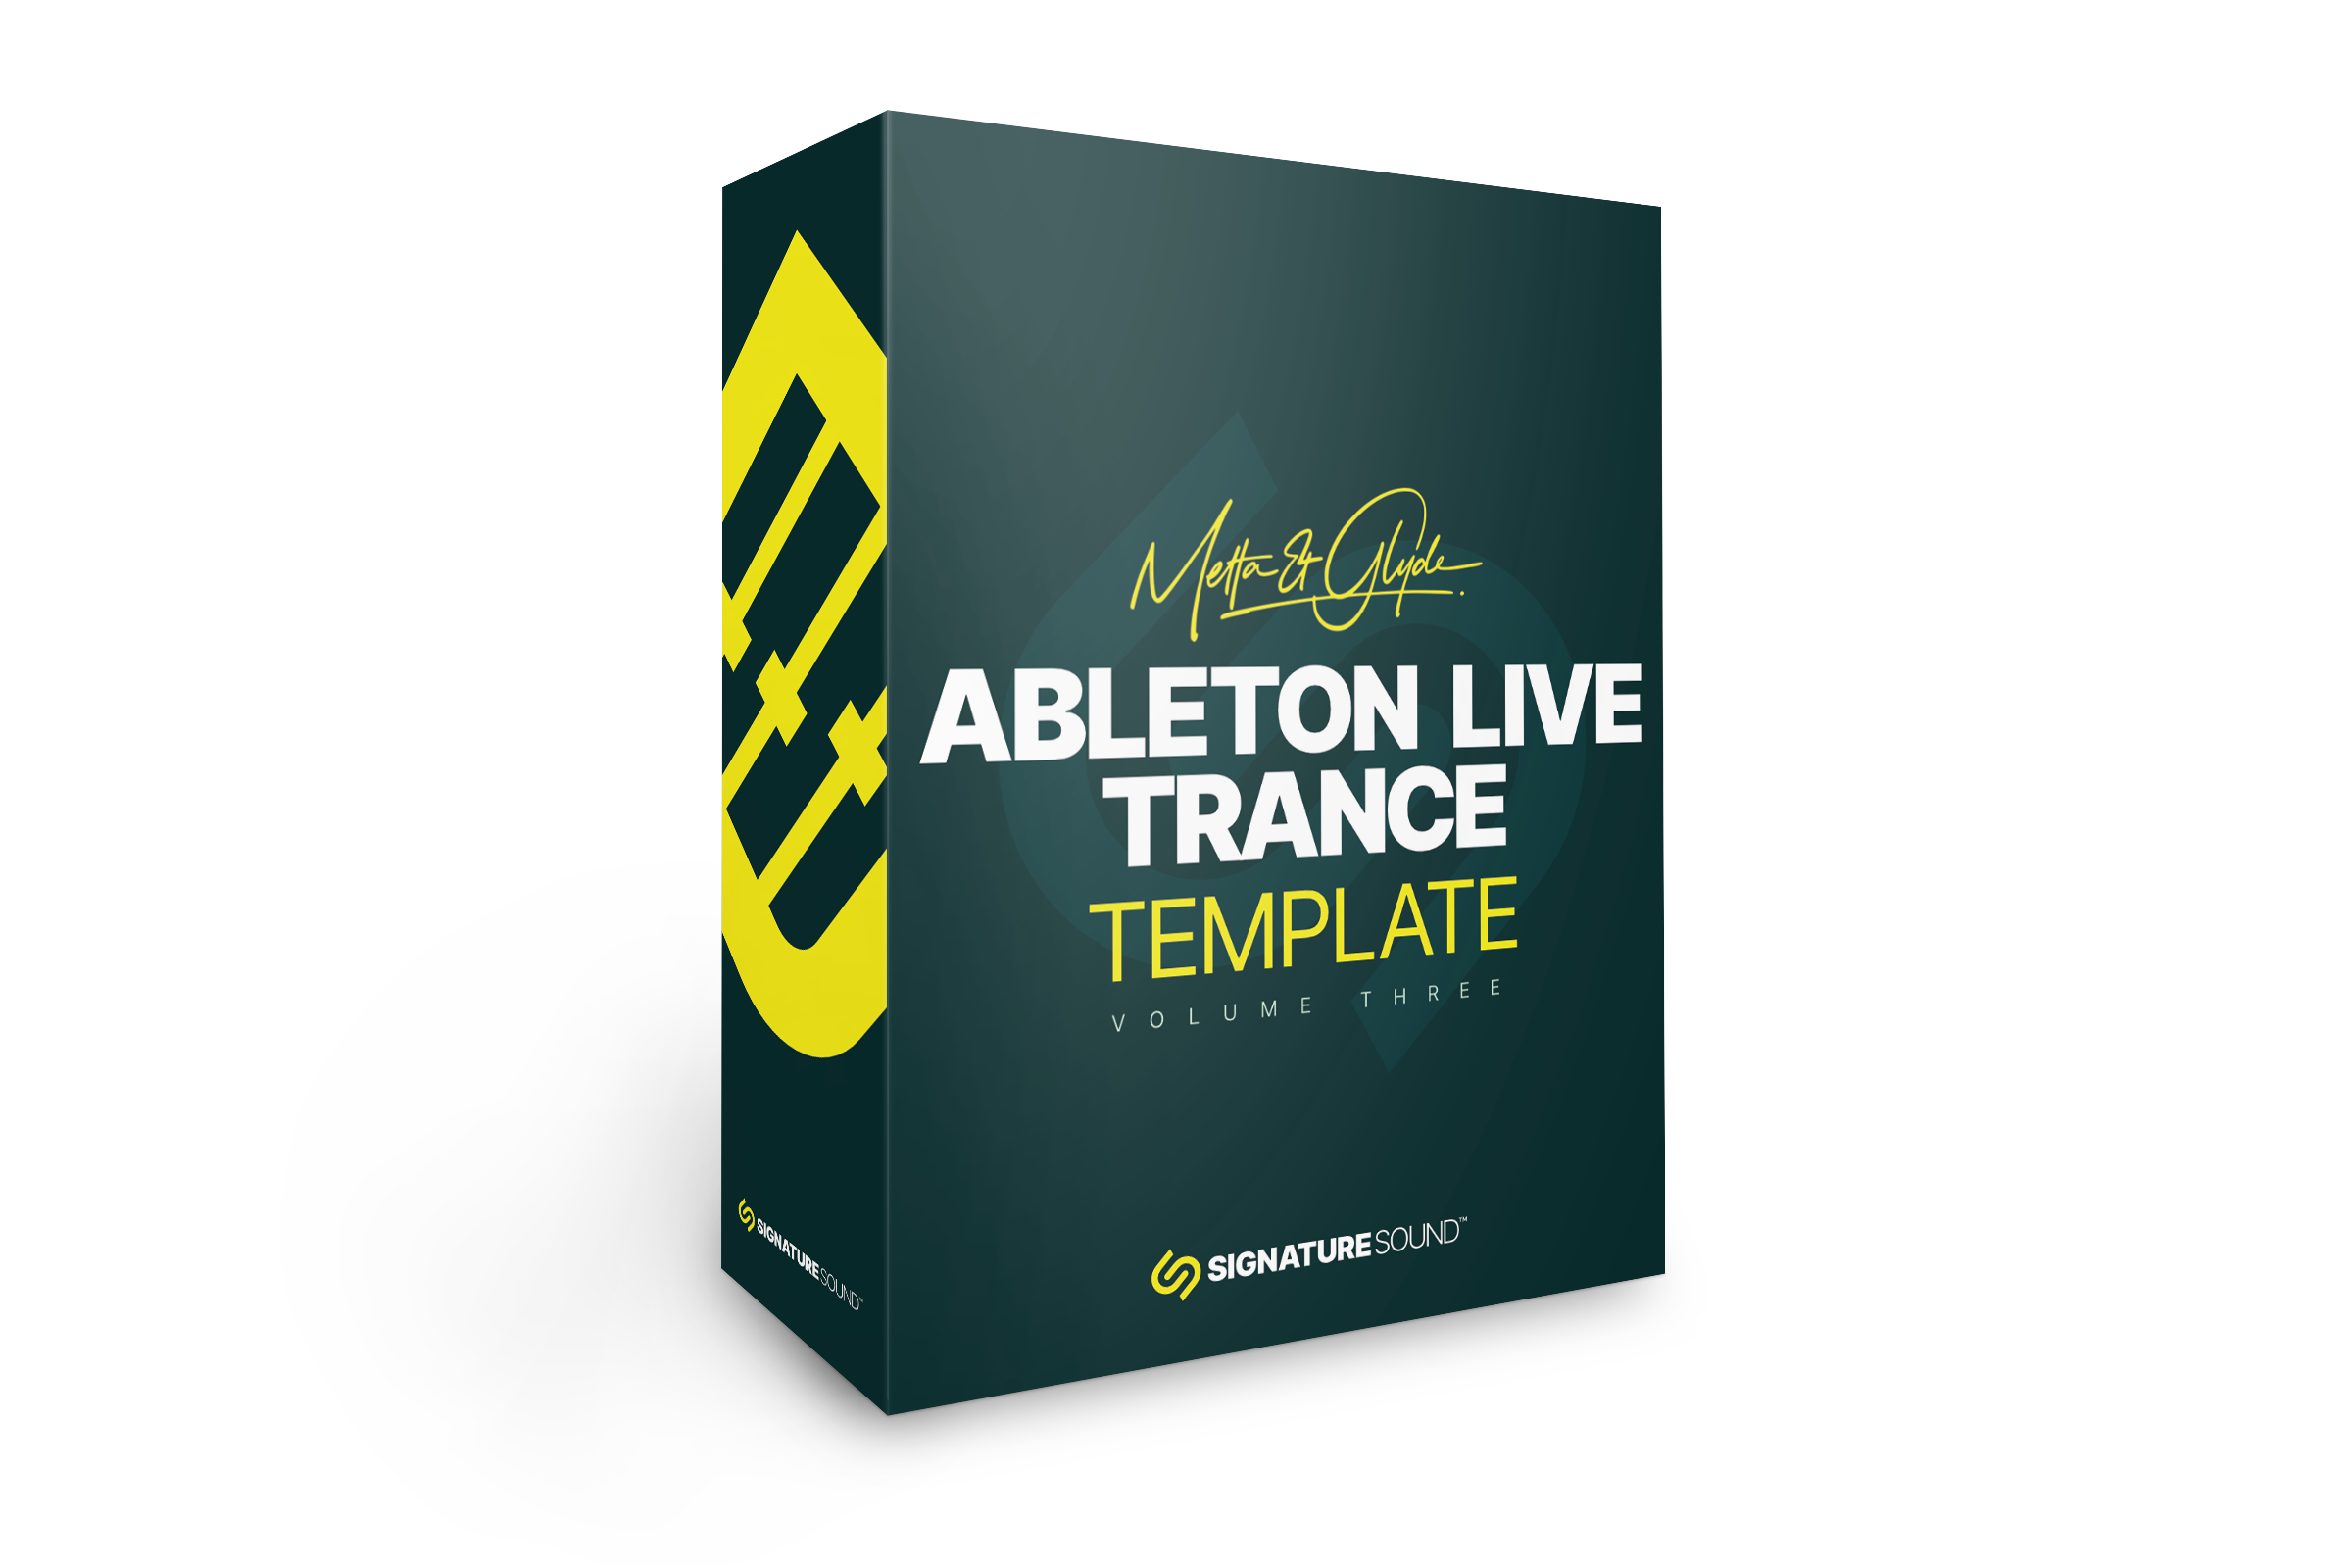 Metta and Glyde Trance Template [Ableton Live] Volume Three